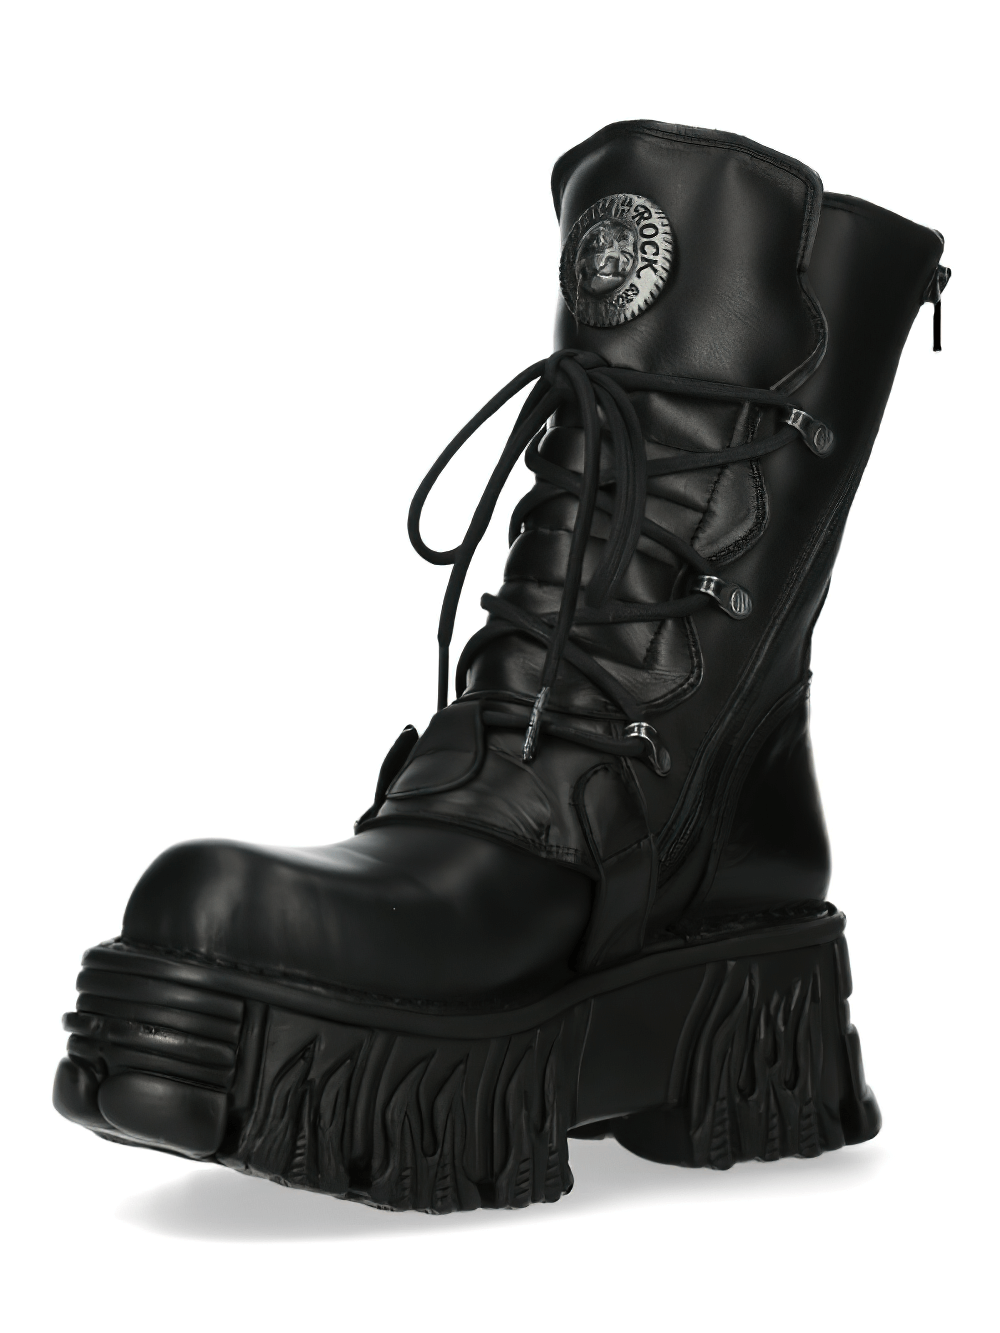 NEW ROCK Gothic Platform Boots with Multiple Buckles